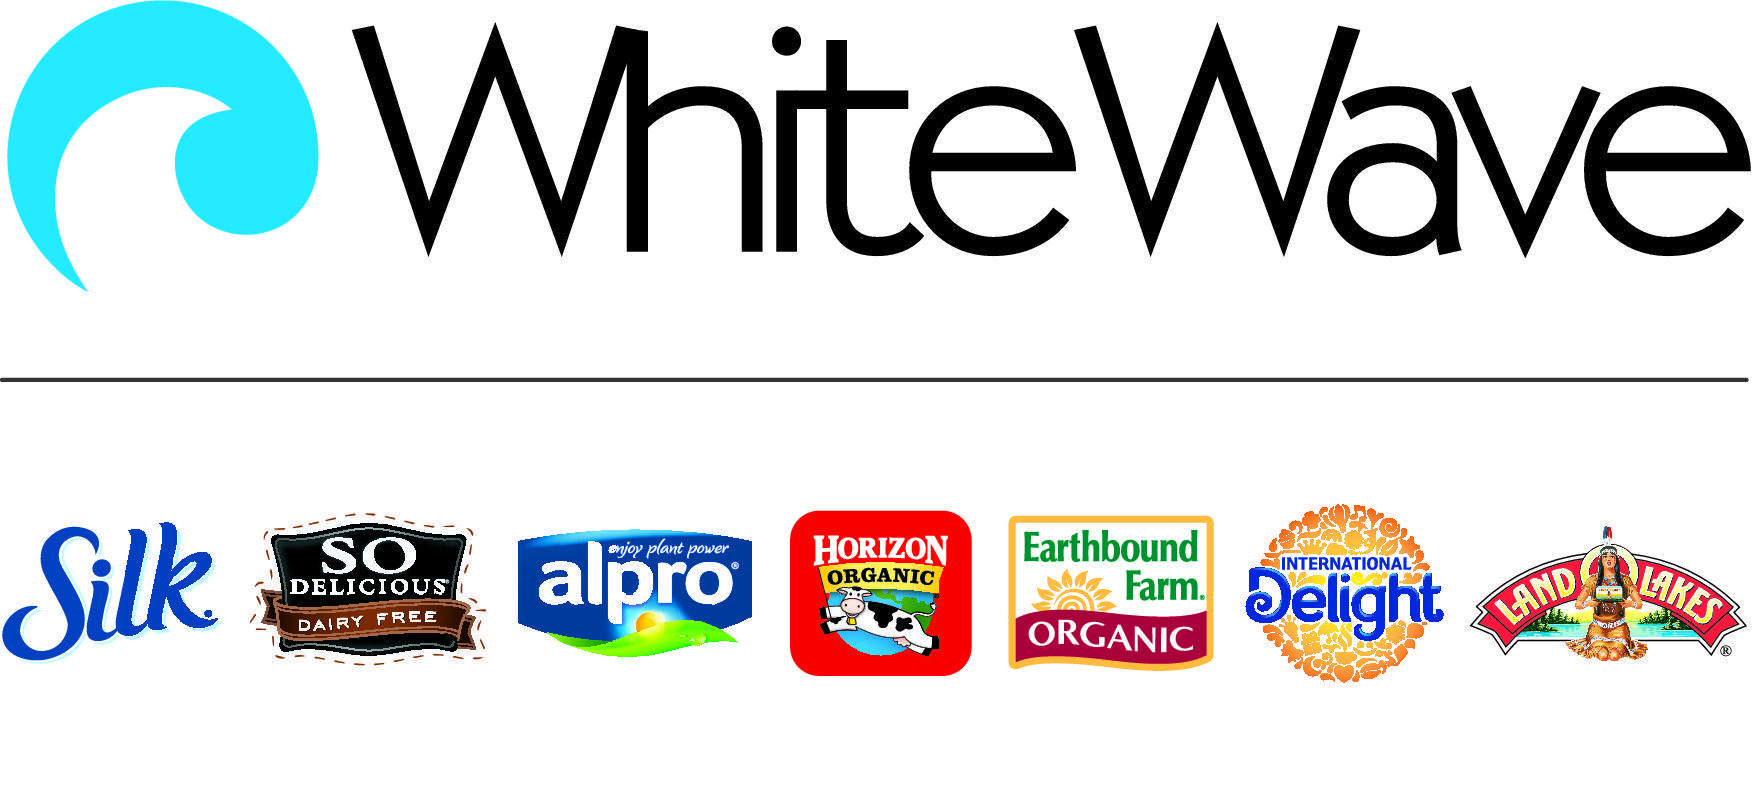 WhiteWave Logo - Small Cap WhiteWave Foods Q4 Earnings Report: Ride the Wave?